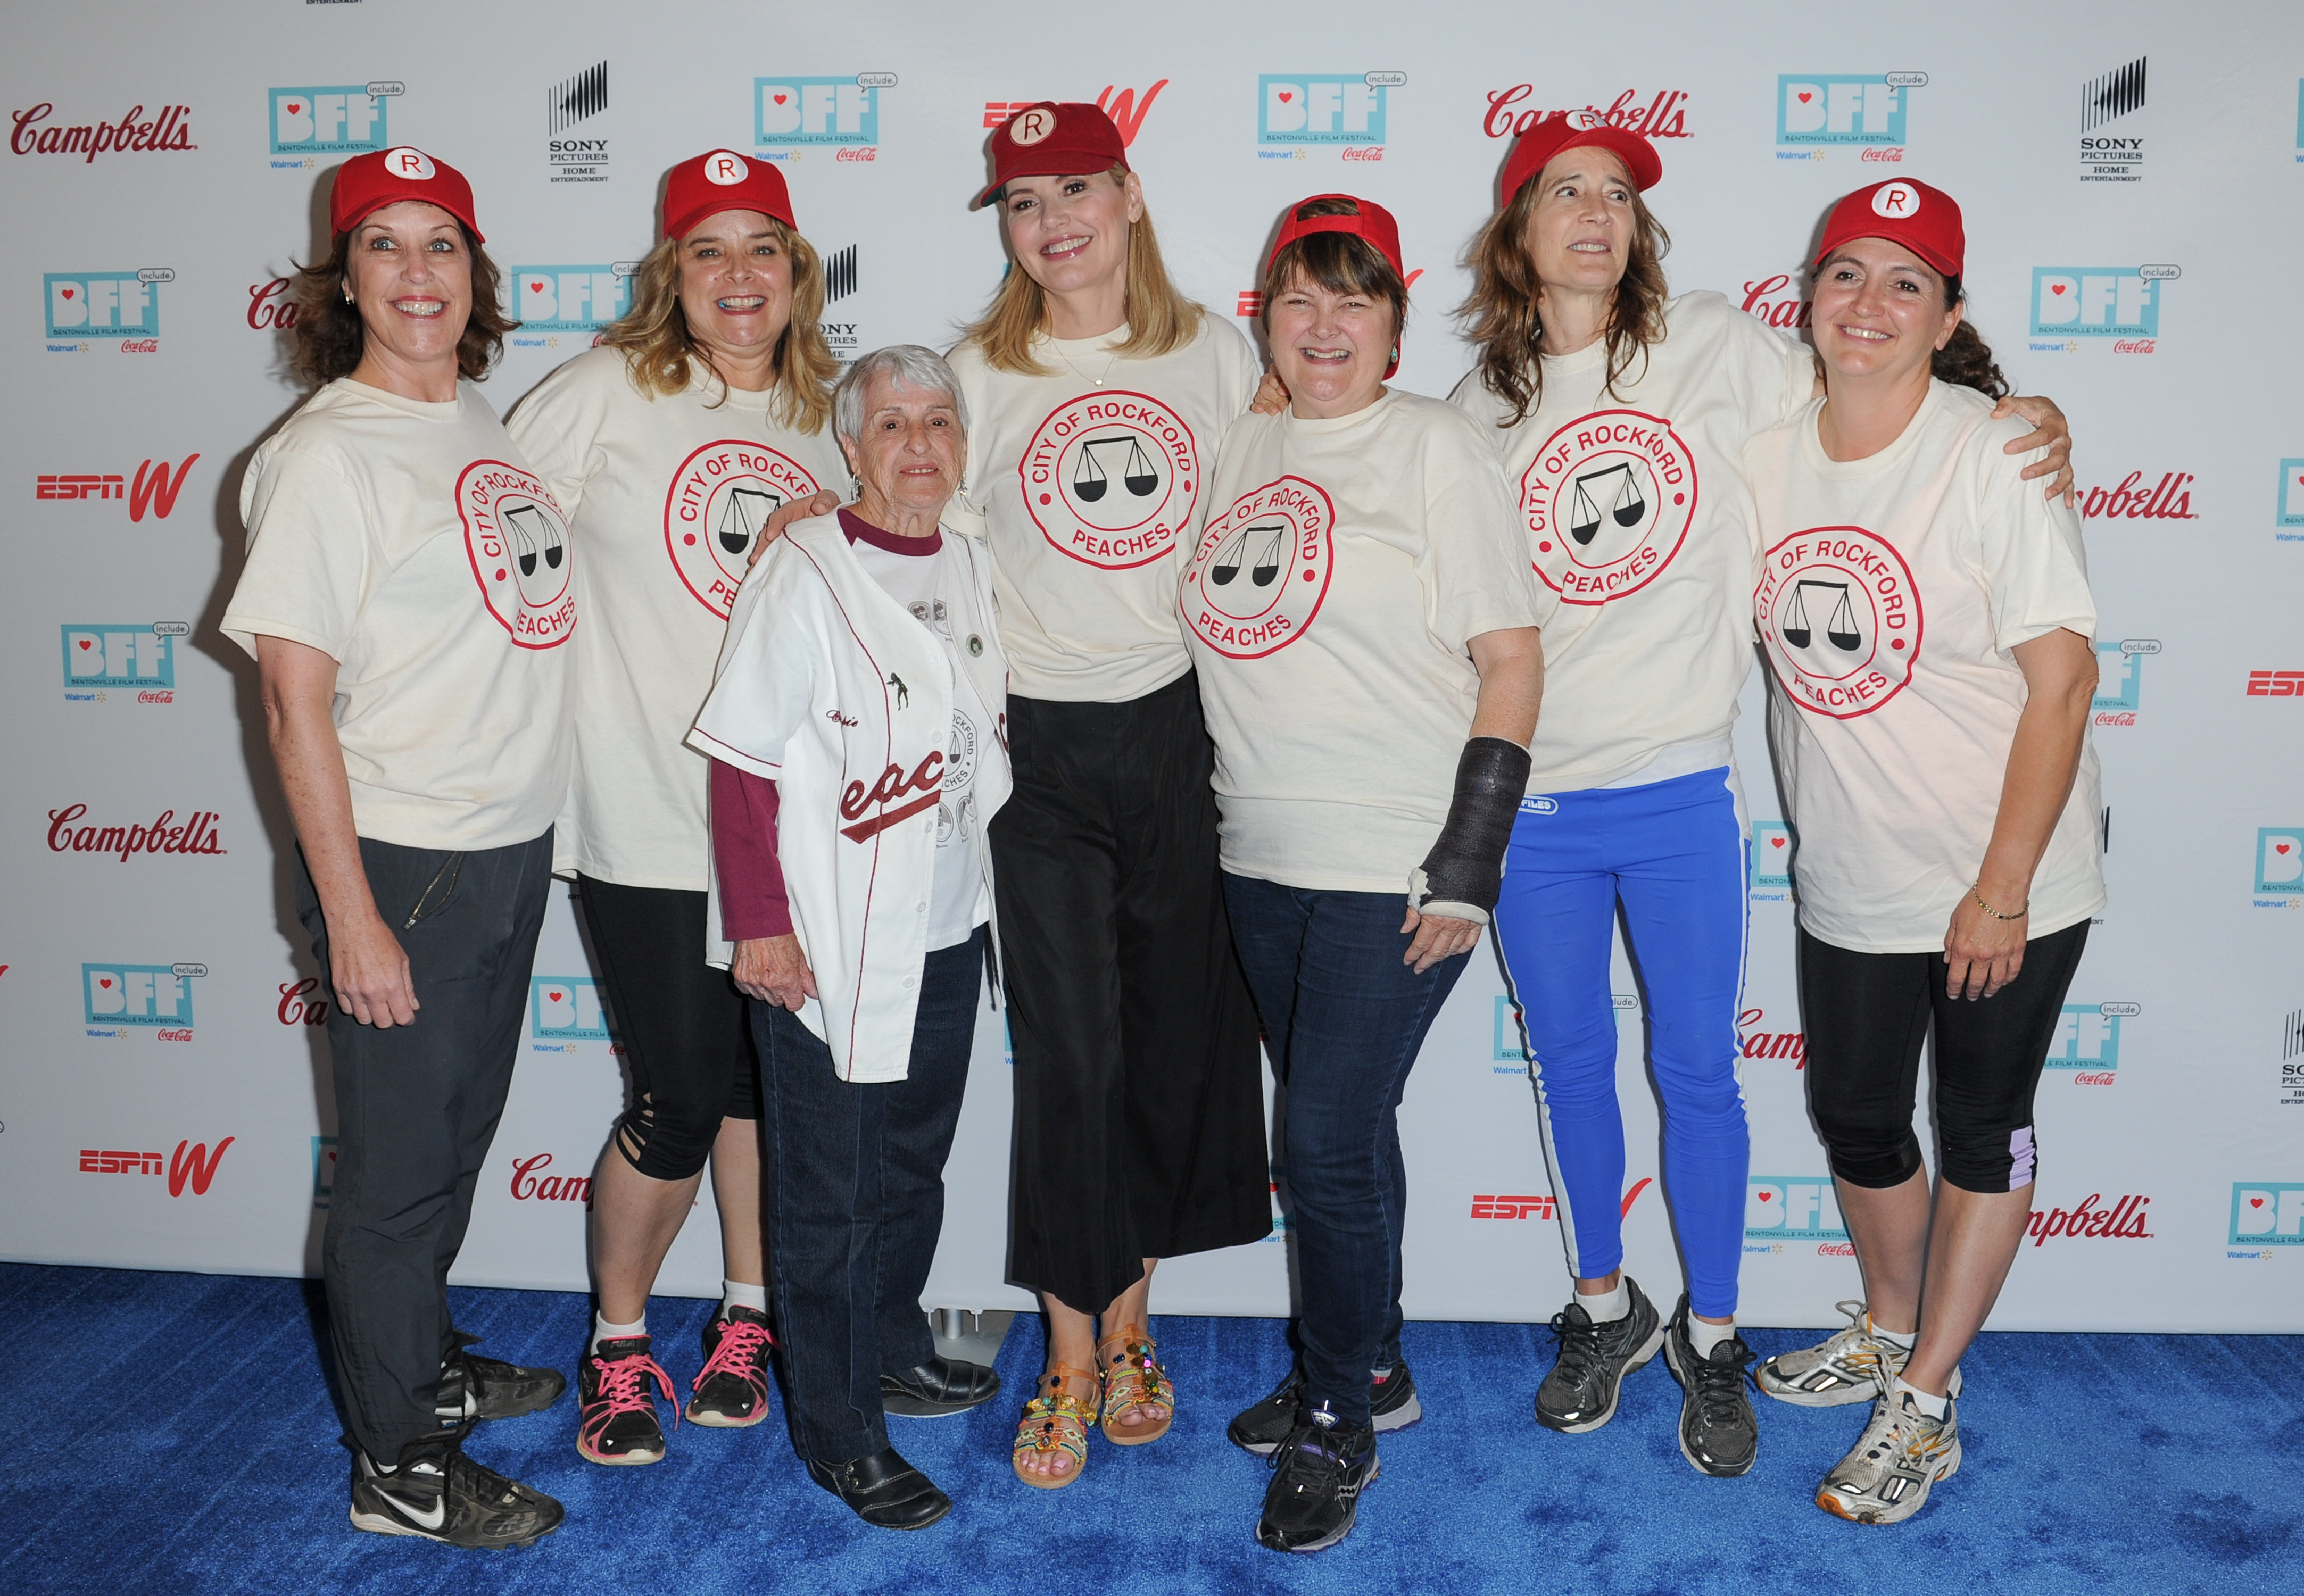 Patti Pelton, Freddie Simpson, Gina Casey, Geena Davis, Megan Cavanagh, Anne Ramsay, and Tracy Reiner, attend the sixth day of Geena Davis' 2nd Annual Bentonville Film Festival Championing Women And Diverse Voices In Media on May 8, 2016, in Bentonville, Arkansas. | Source: Getty Images